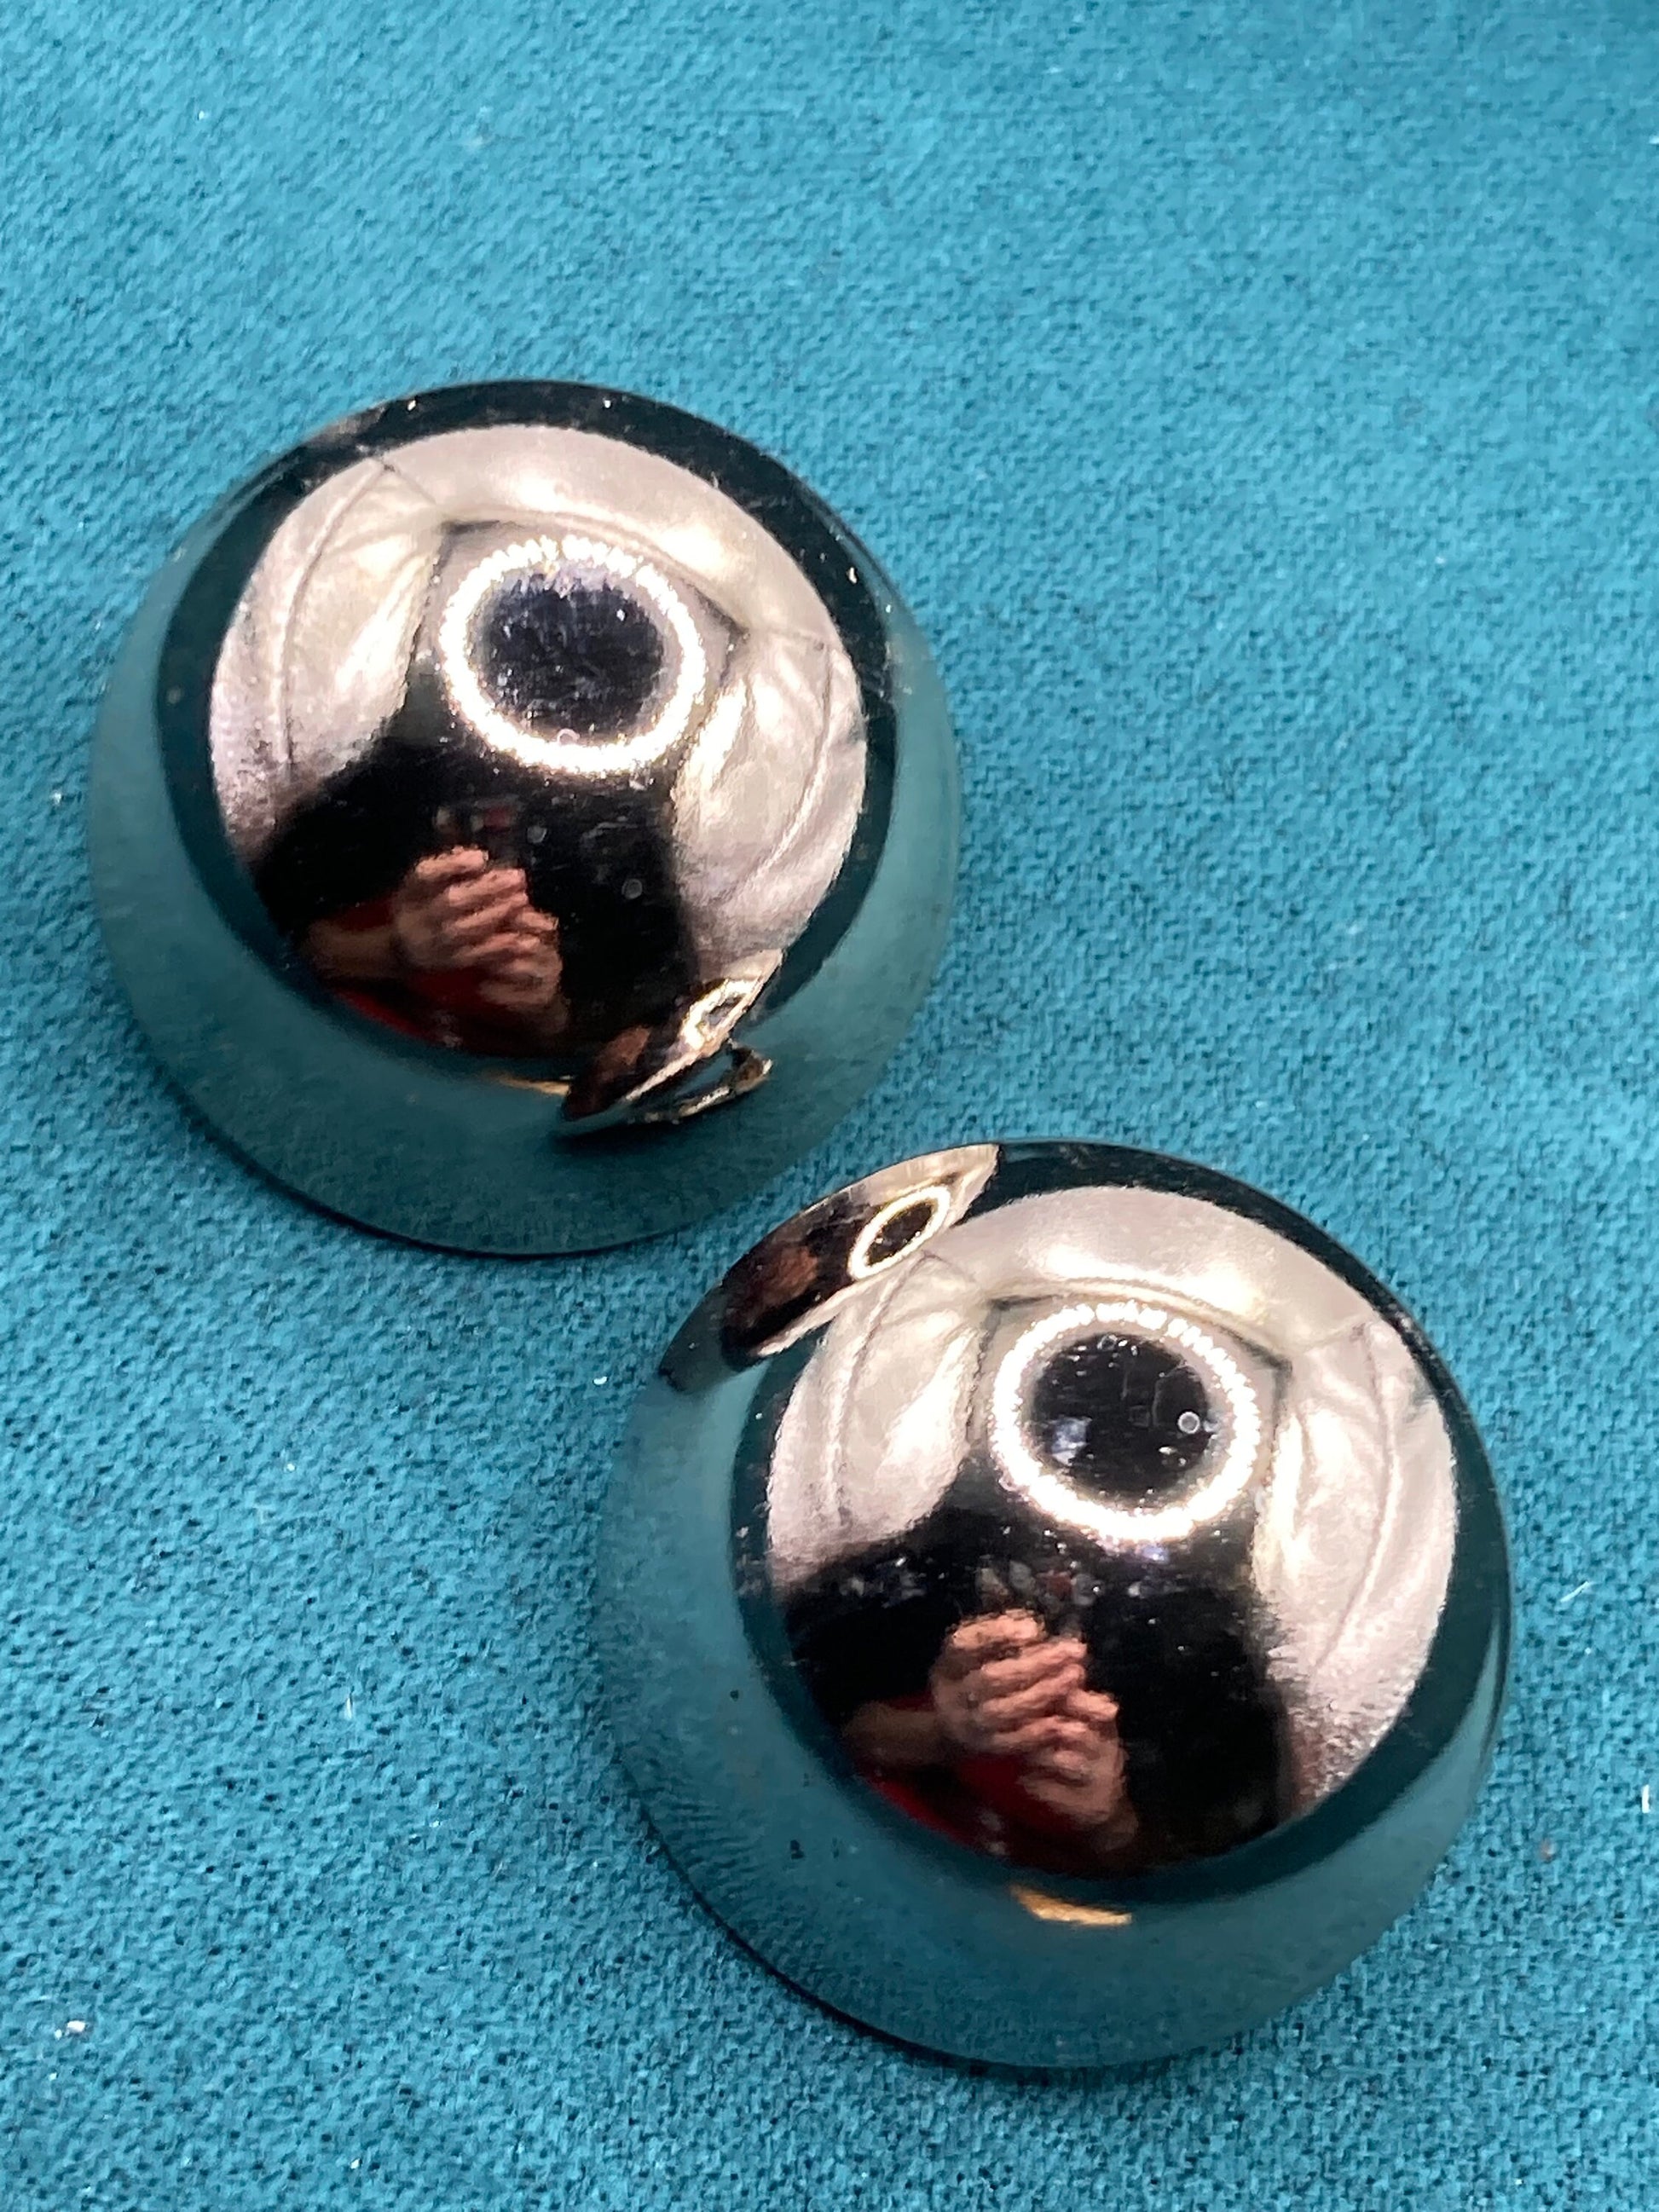 True vintage pristine oversized Silver High sheen metal 2.5cm high dome earrings genuine period old shop stock